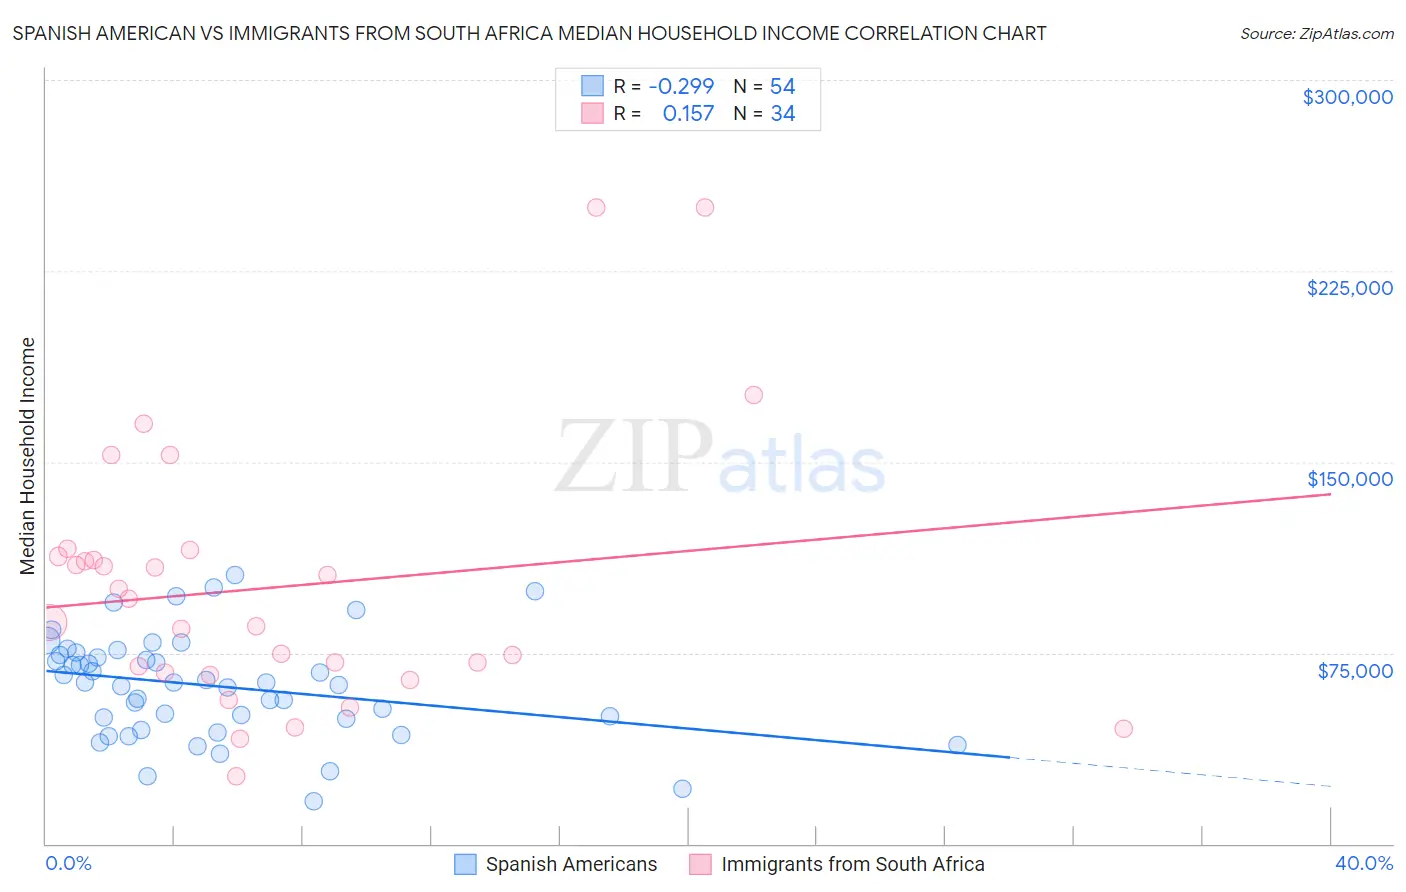 Spanish American vs Immigrants from South Africa Median Household Income